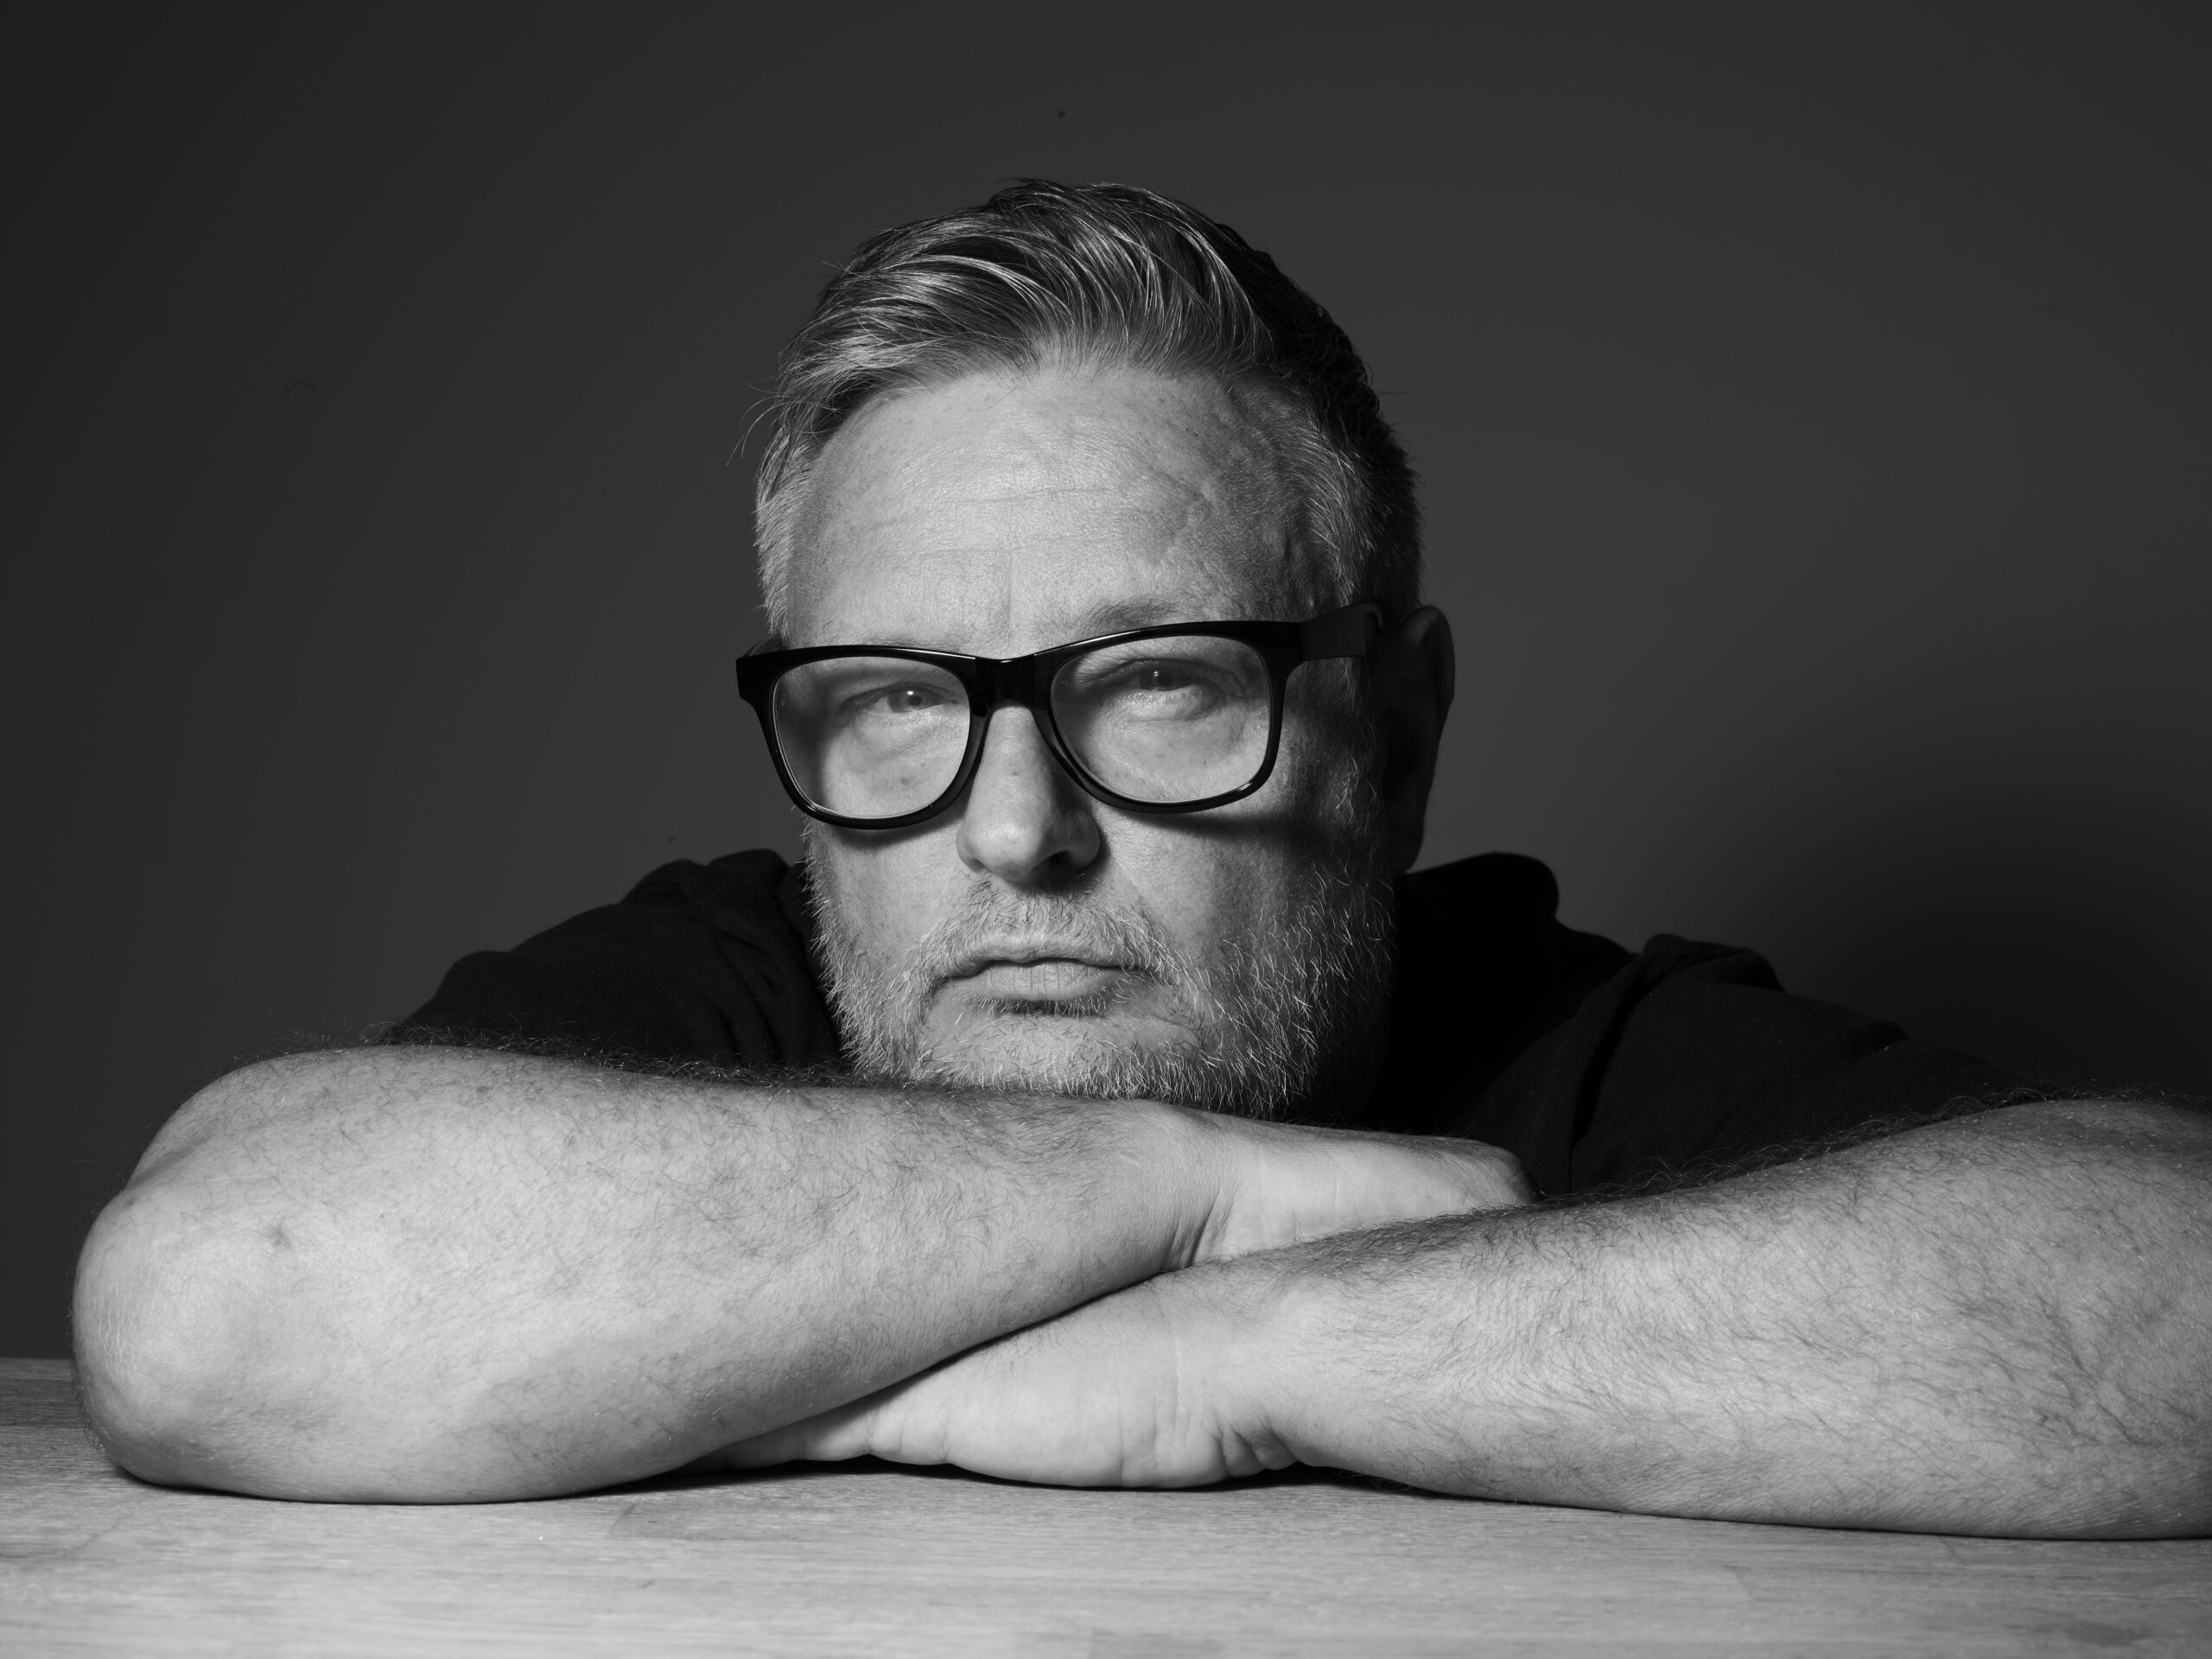 Ways of Seeing: A Q+A with Rankin